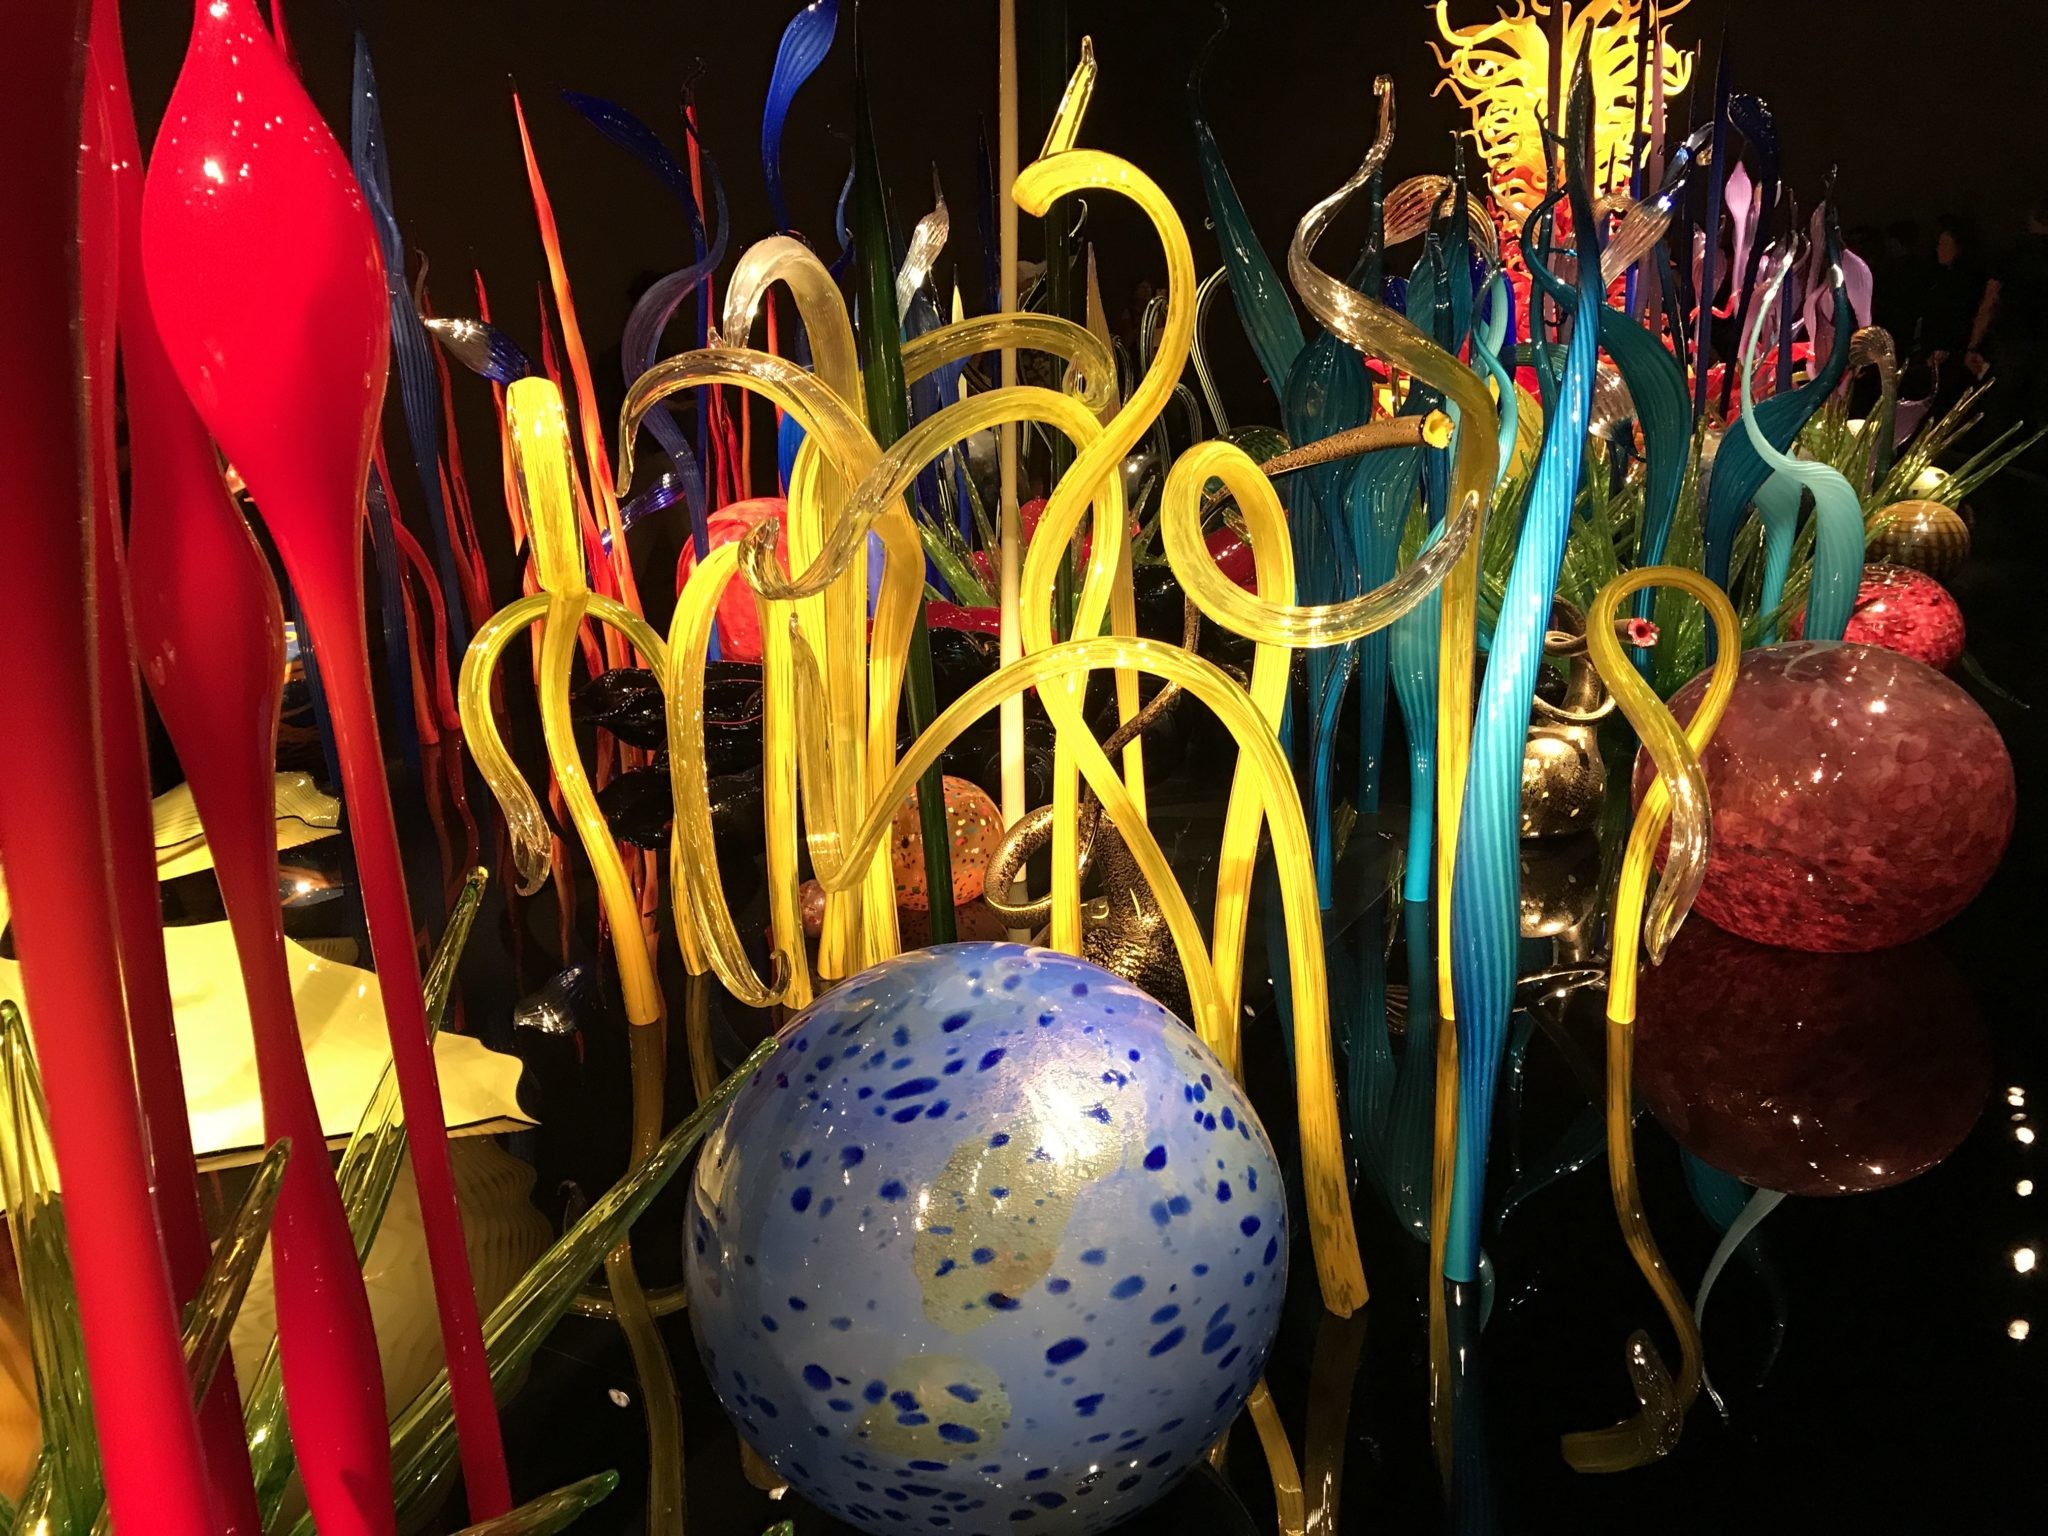 2048x1536 Just one of the fanciful worlds created by Dale Chihuly out of glass and  imagination